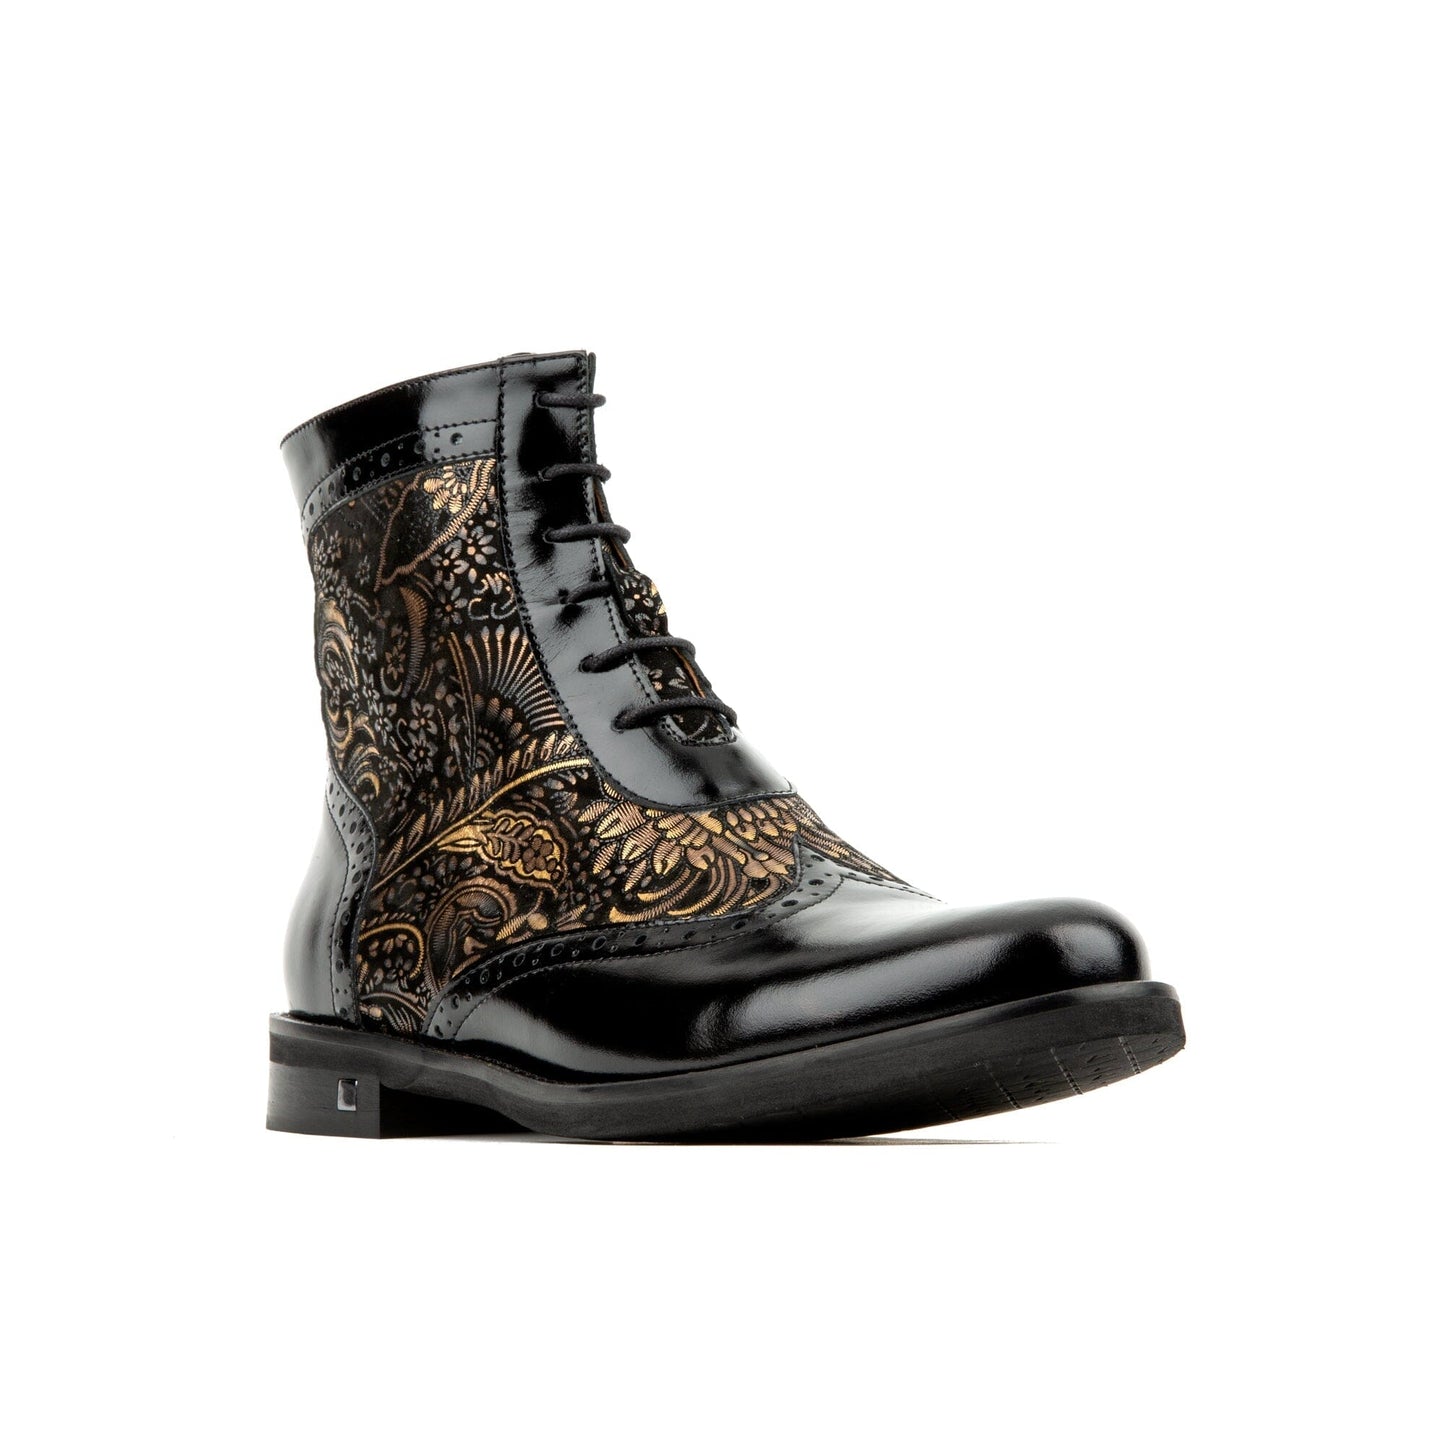 Mantis - Black & Gold Ankle Boots Embassy London 